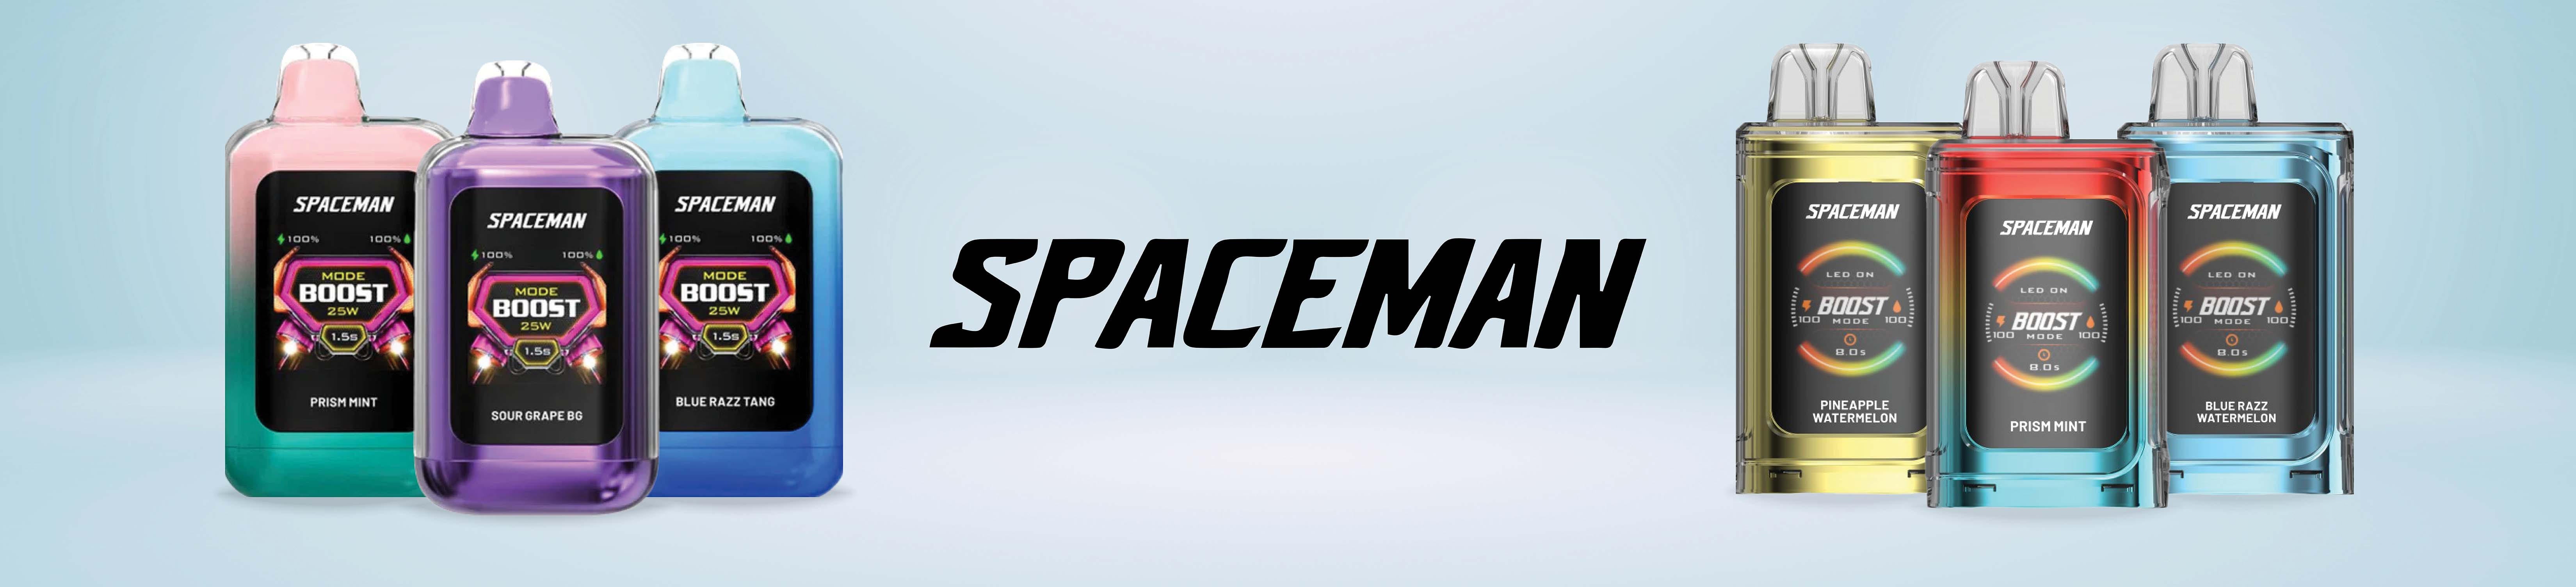 Spaceman Collection Banner